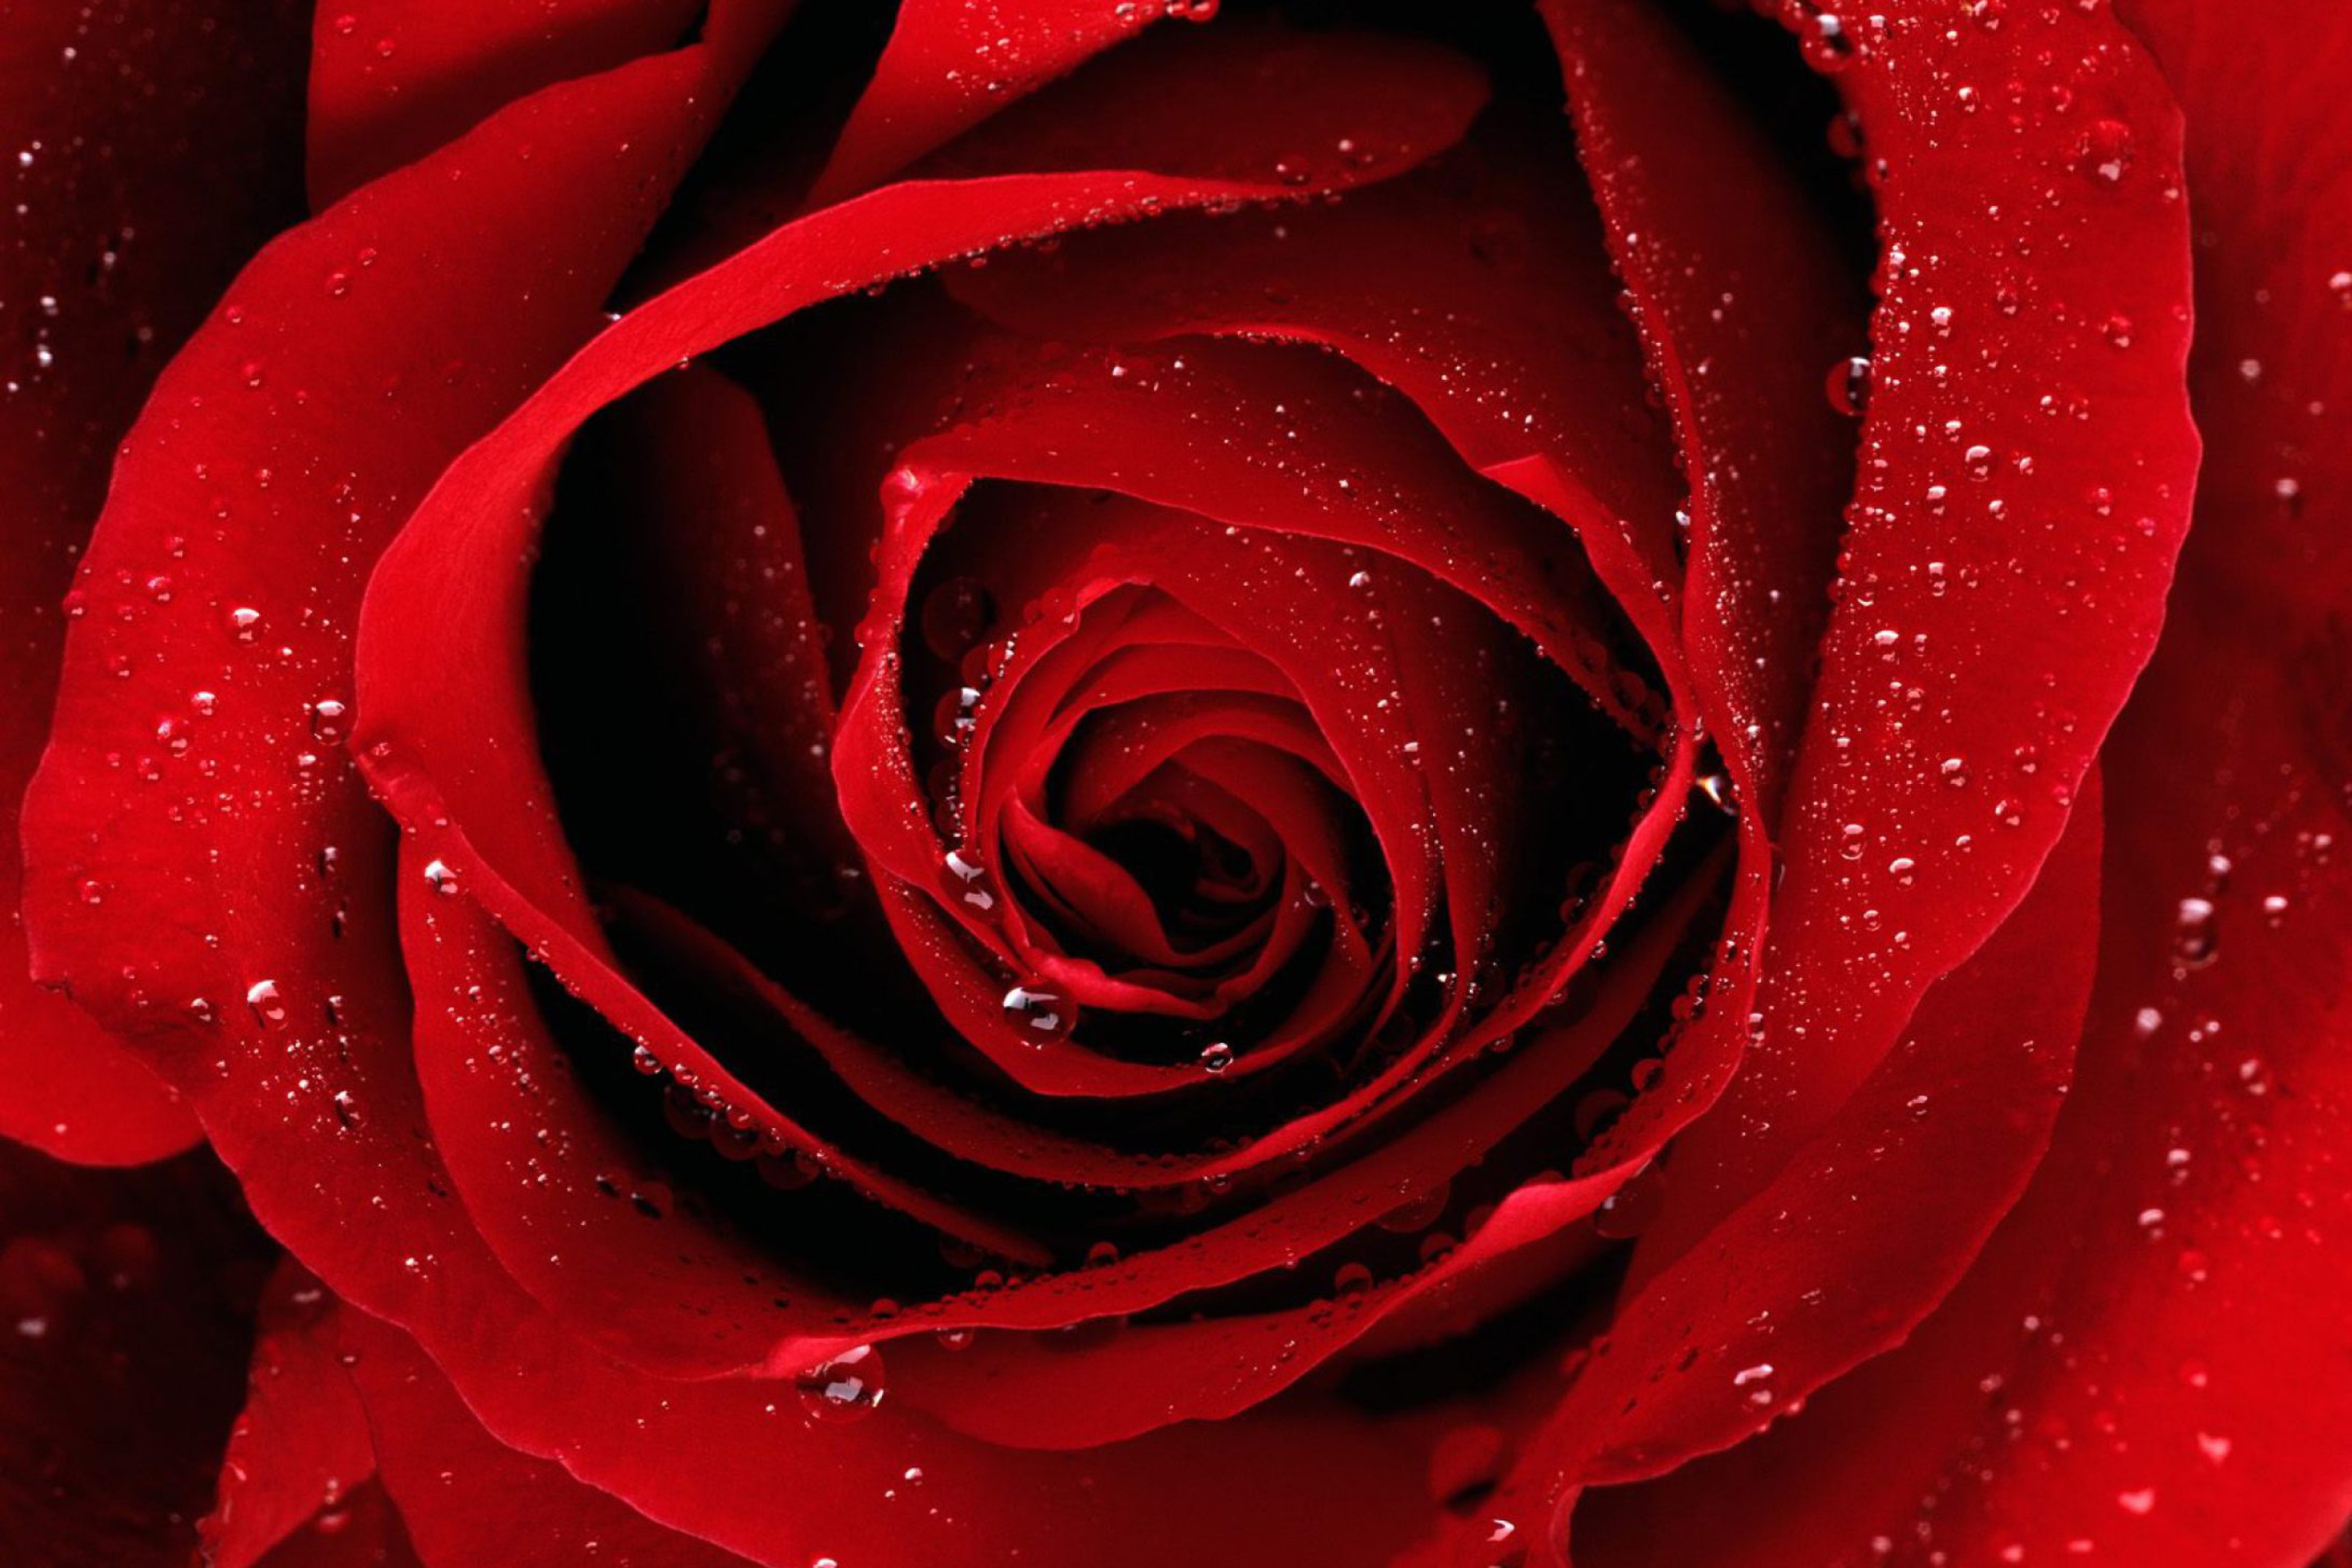 Das Scarlet Rose With Water Drops Wallpaper 2880x1920